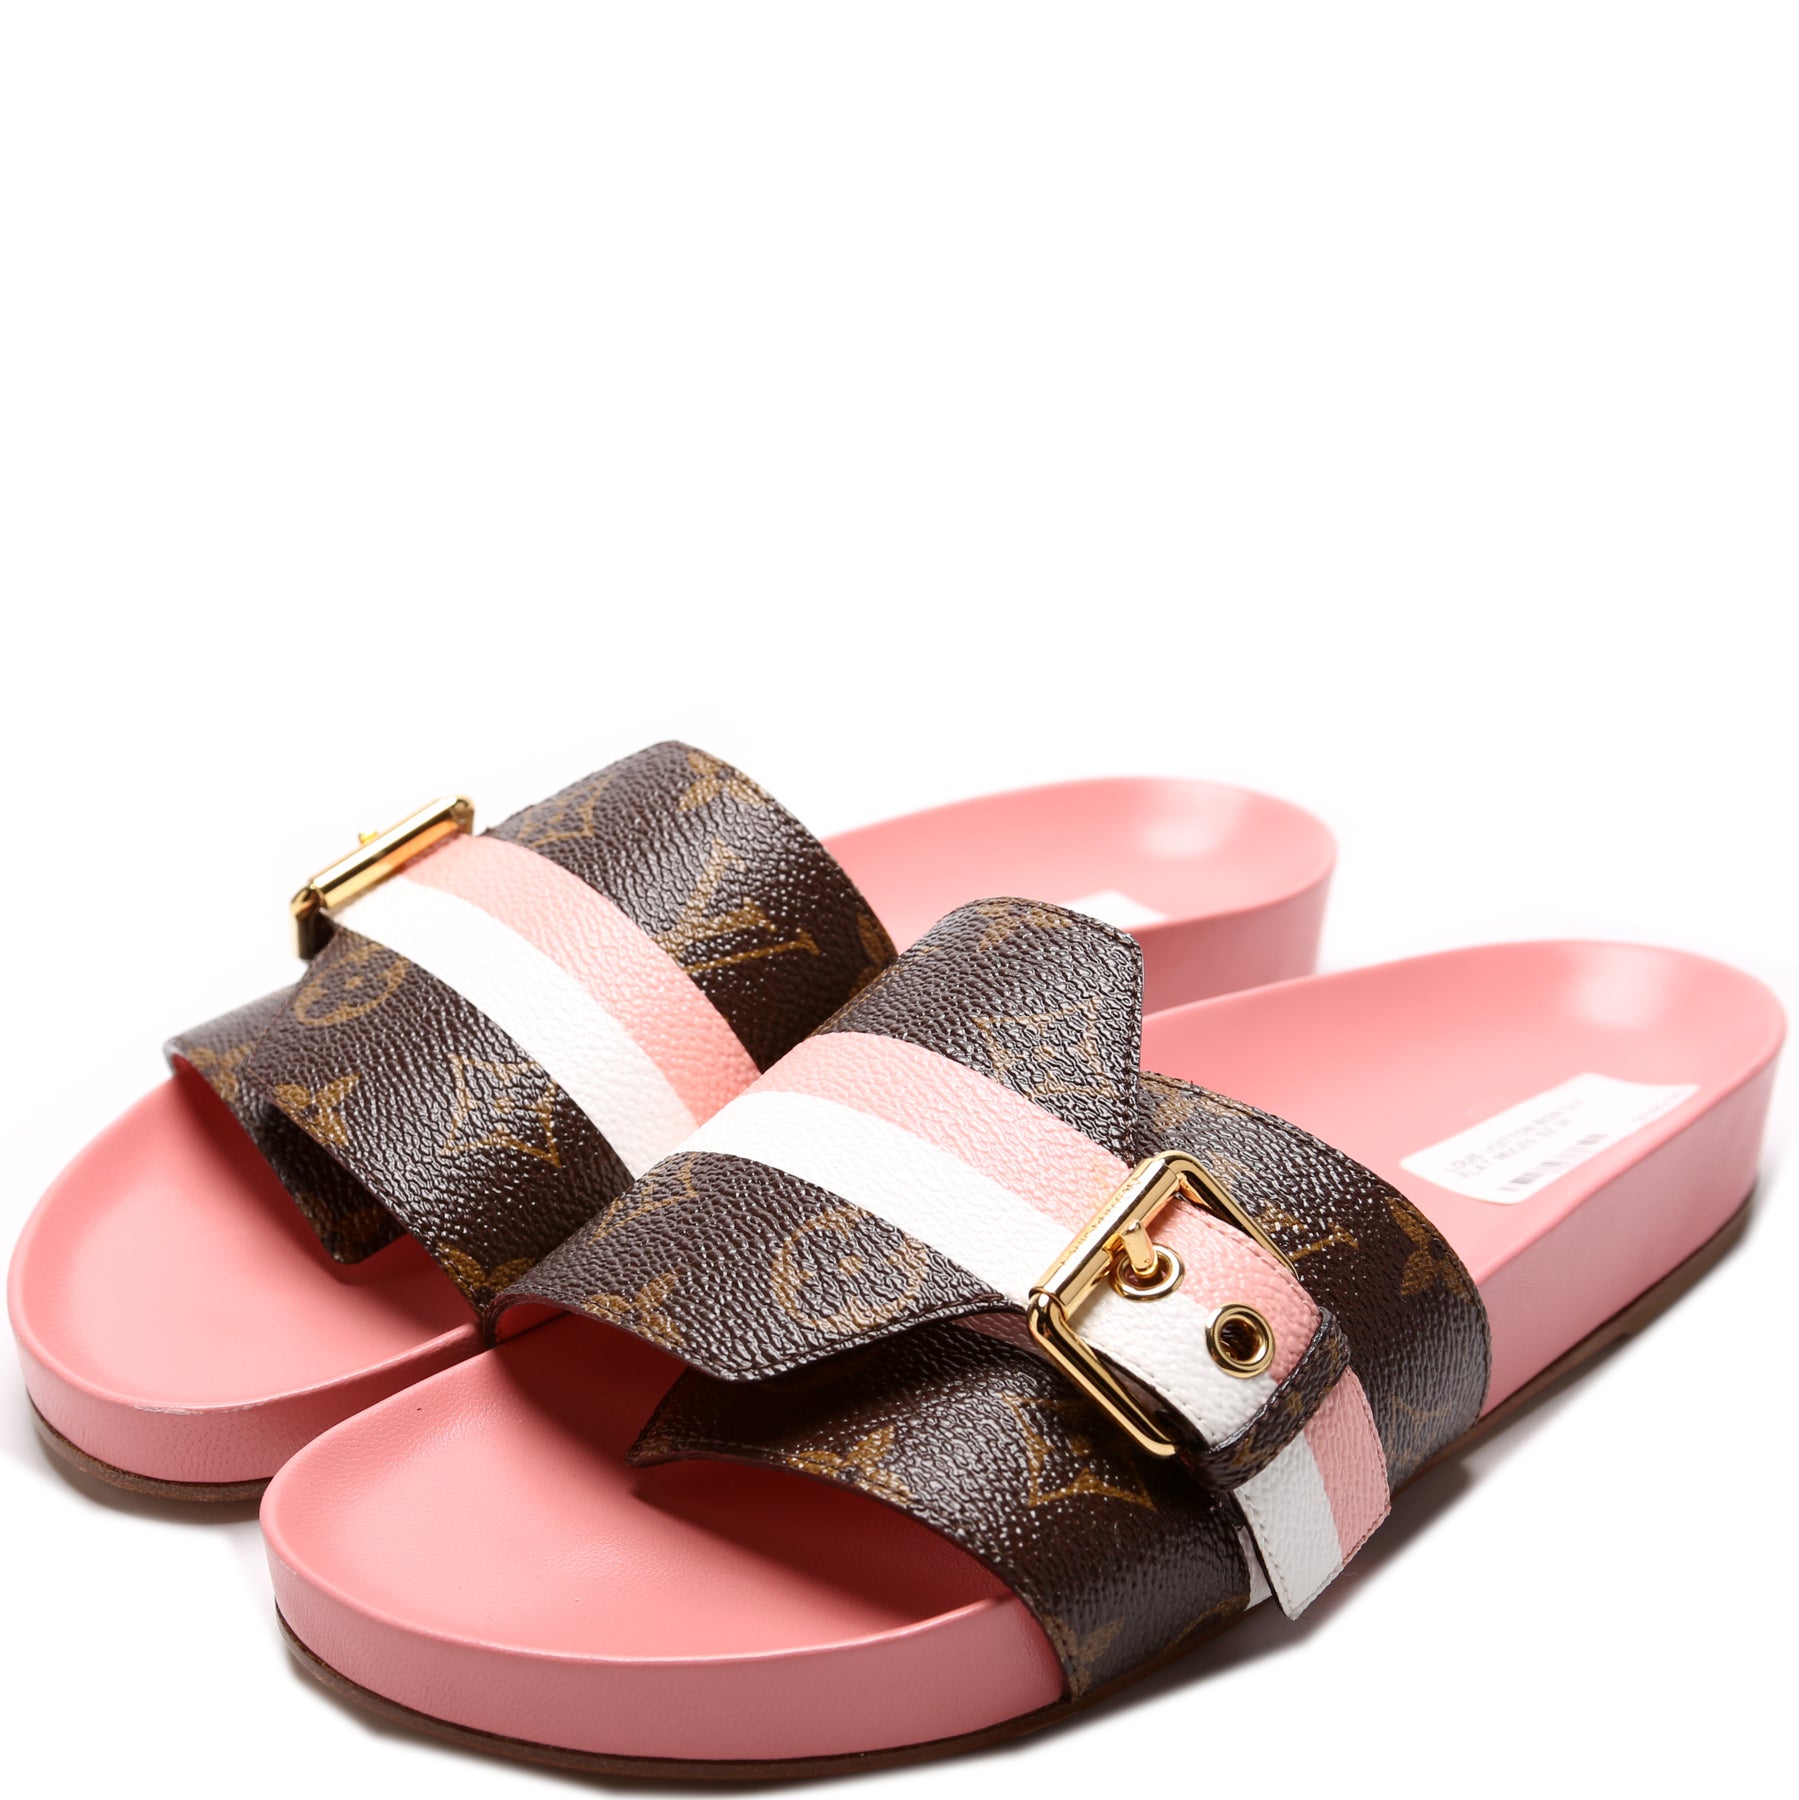 Louis Vuitton Sunbath Flat Mule Sliders Brand New With Box And